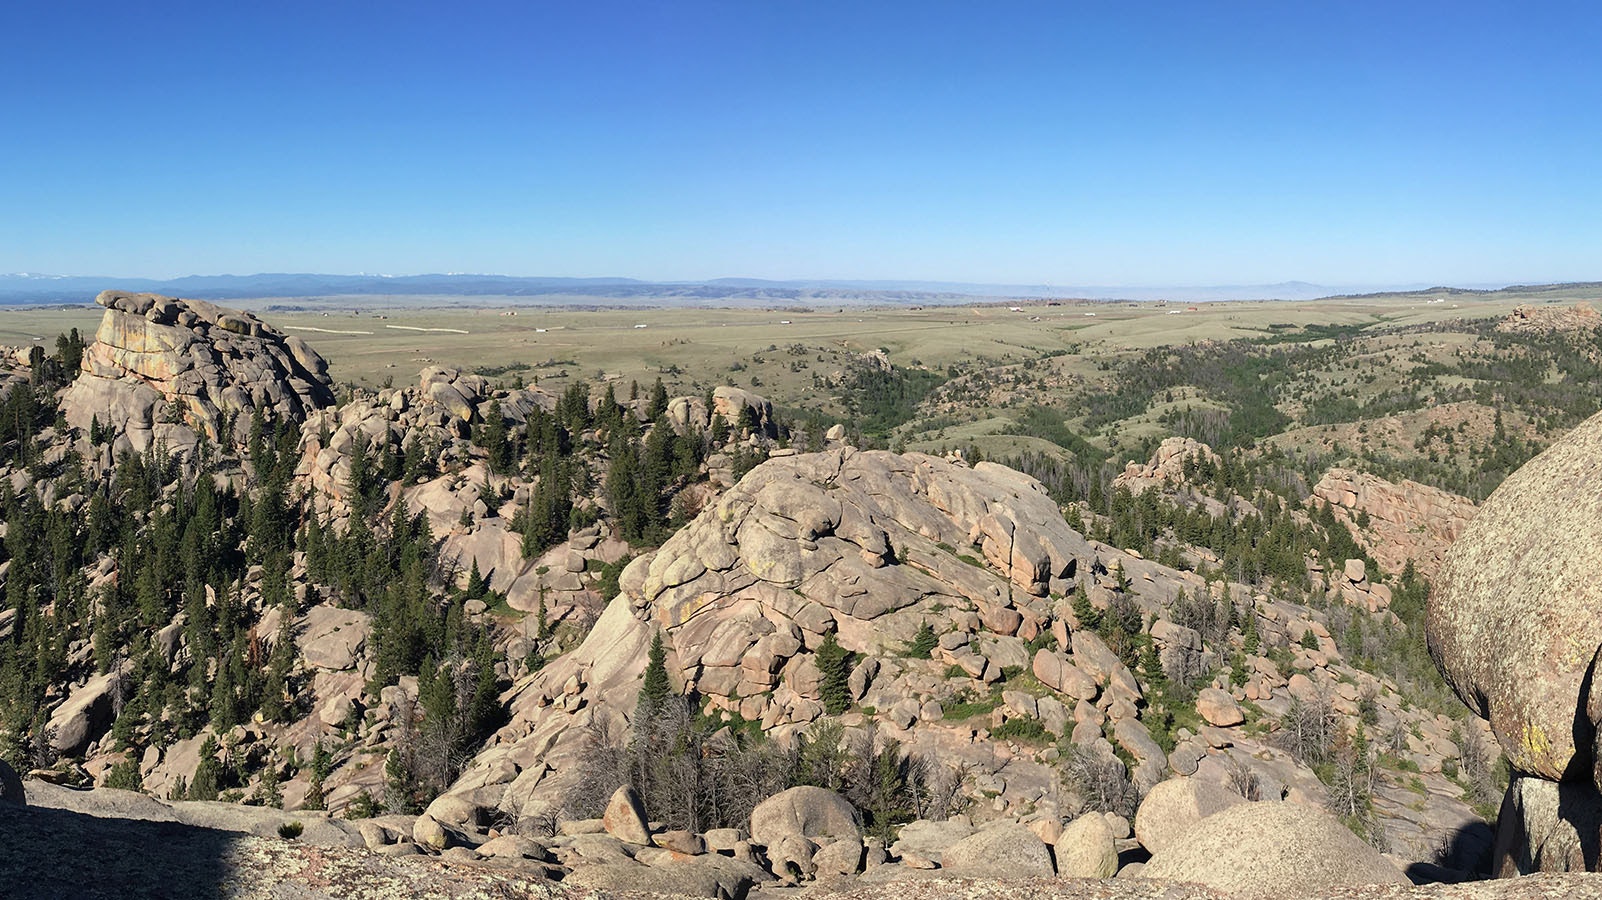 The Vedawoo area just east of Laramie, Wyoming, is an example of some of the ancient, stable rock that makes up the Wyoming craton, which has been the nexus for the formation of the North American continent we know today.